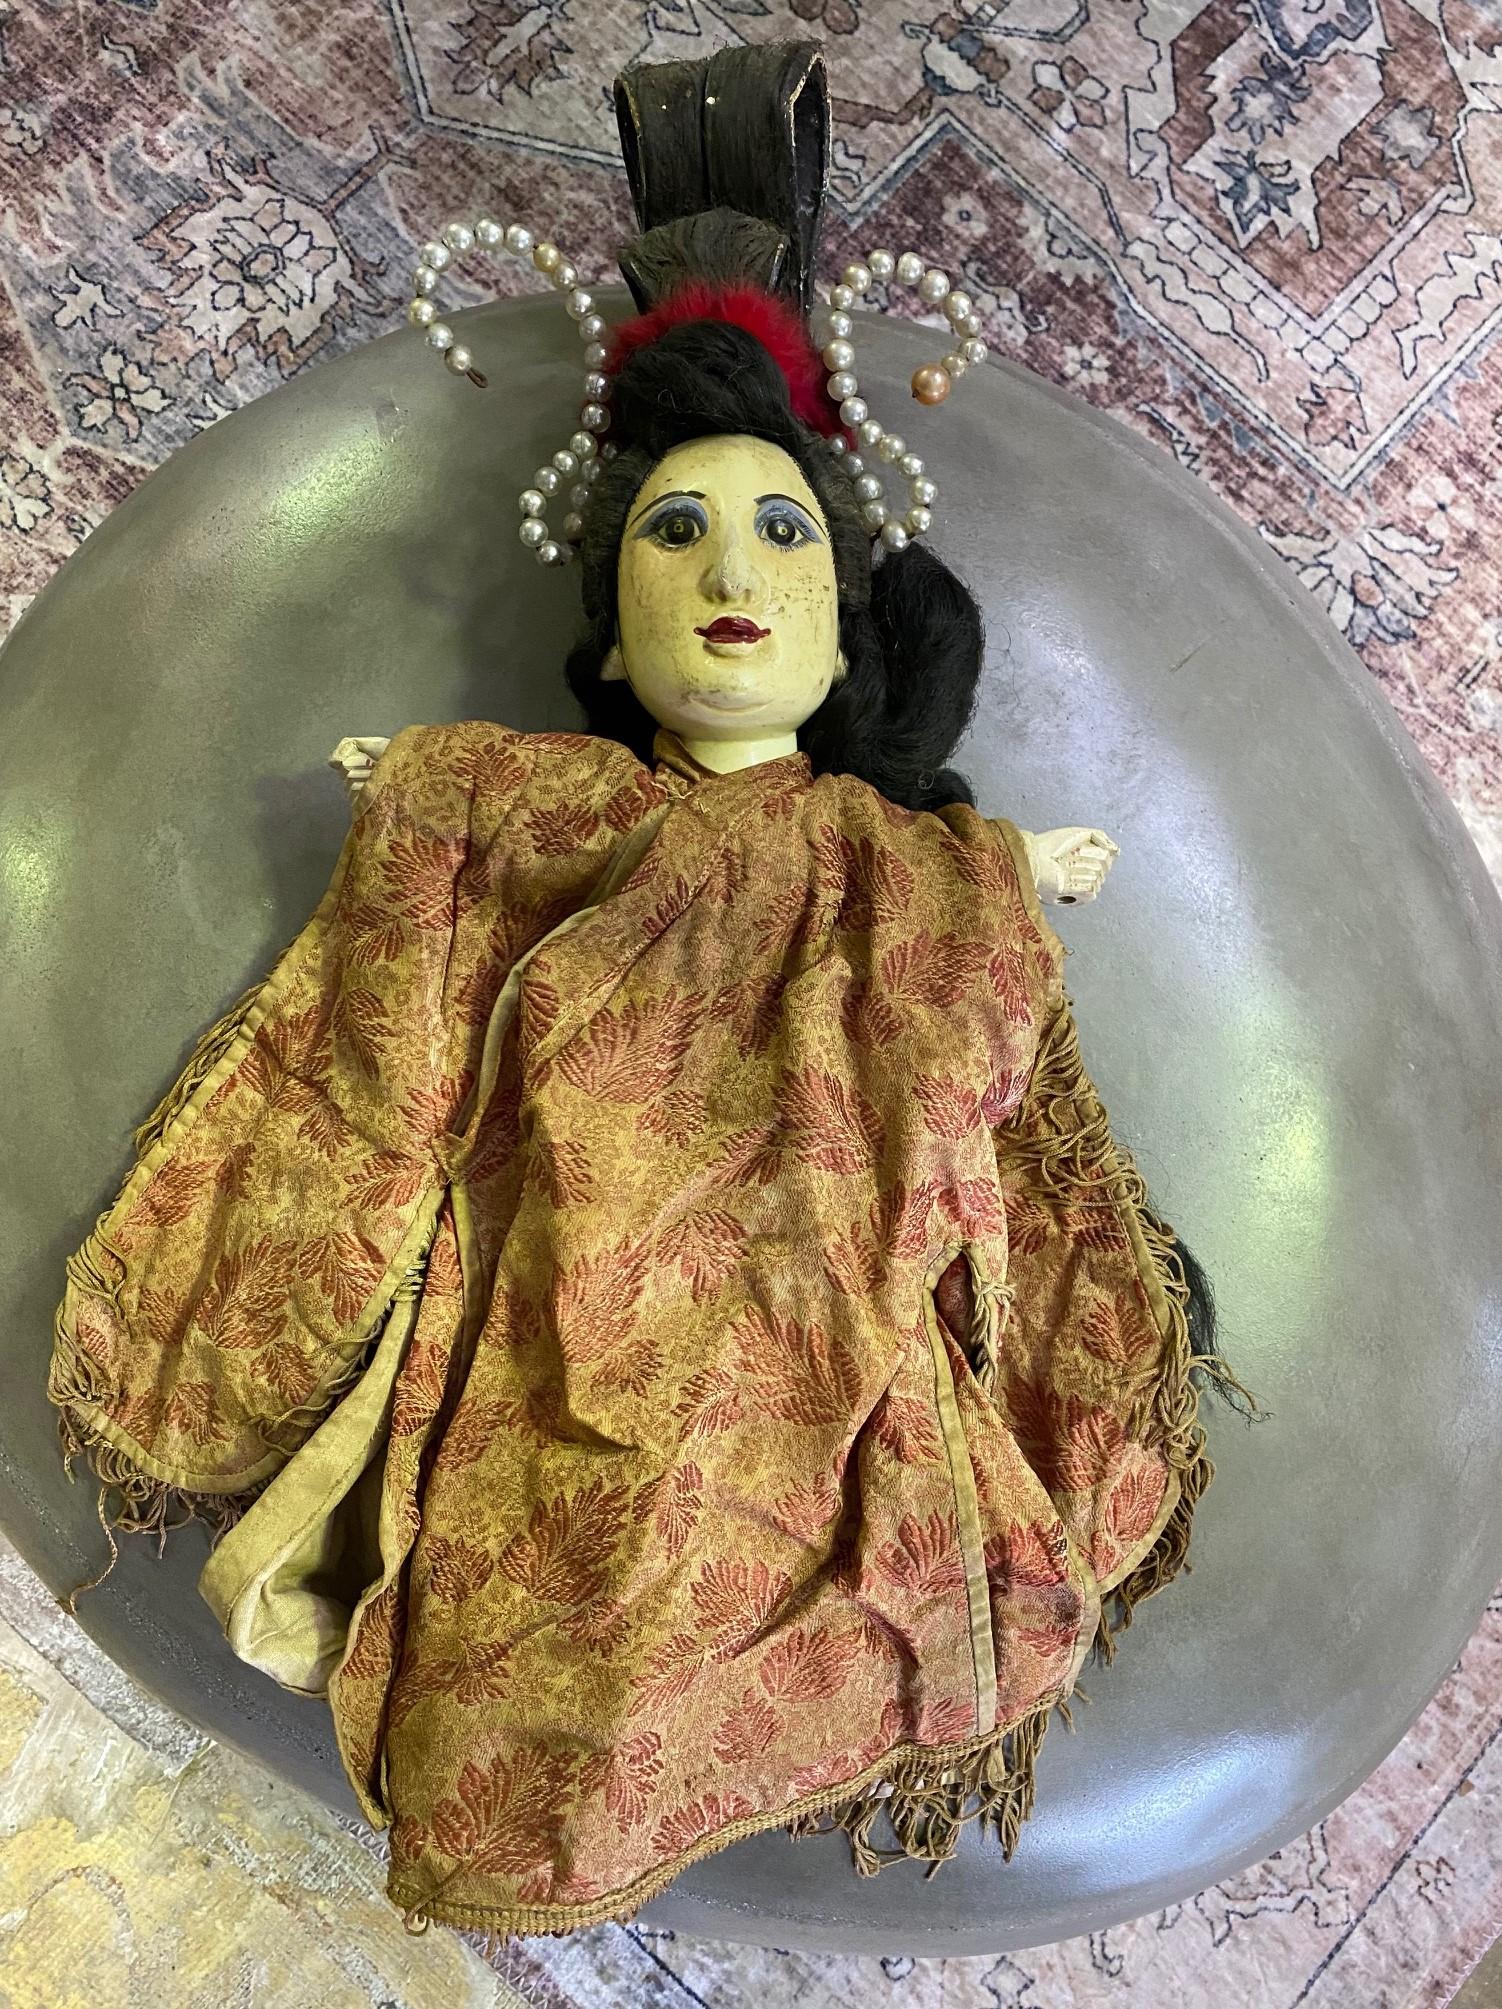 A wonderful work complete with a unique wood-carved and hand painted face, a wonderfully fabulous hairdo, and an original textile garment. 

From a group of 7 Chinese opera puppets, we acquired from a collector. Each puppet shows clear signs of